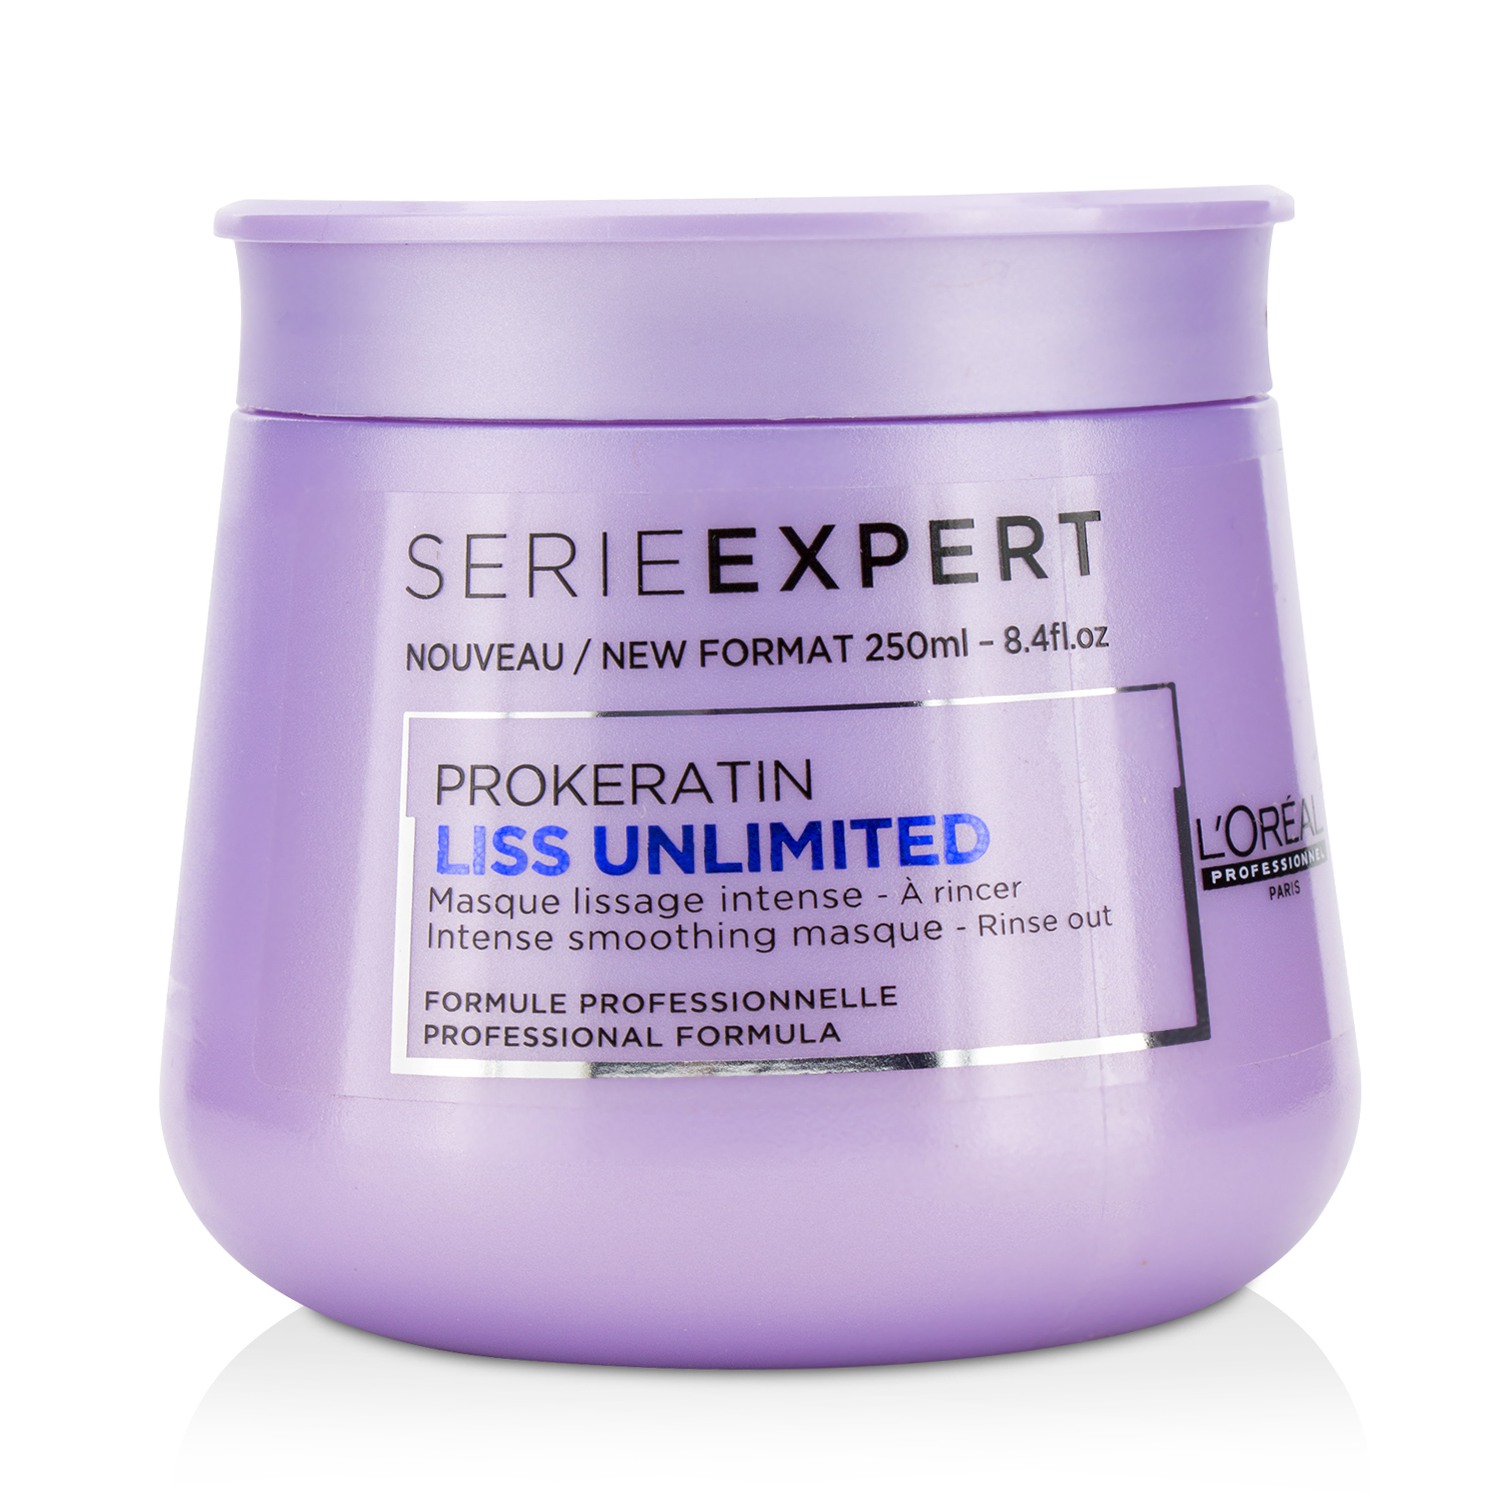 Professionnel Serie Expert - Liss Unlimited Prokeratin Intense Smoothing Masque LOreal Image